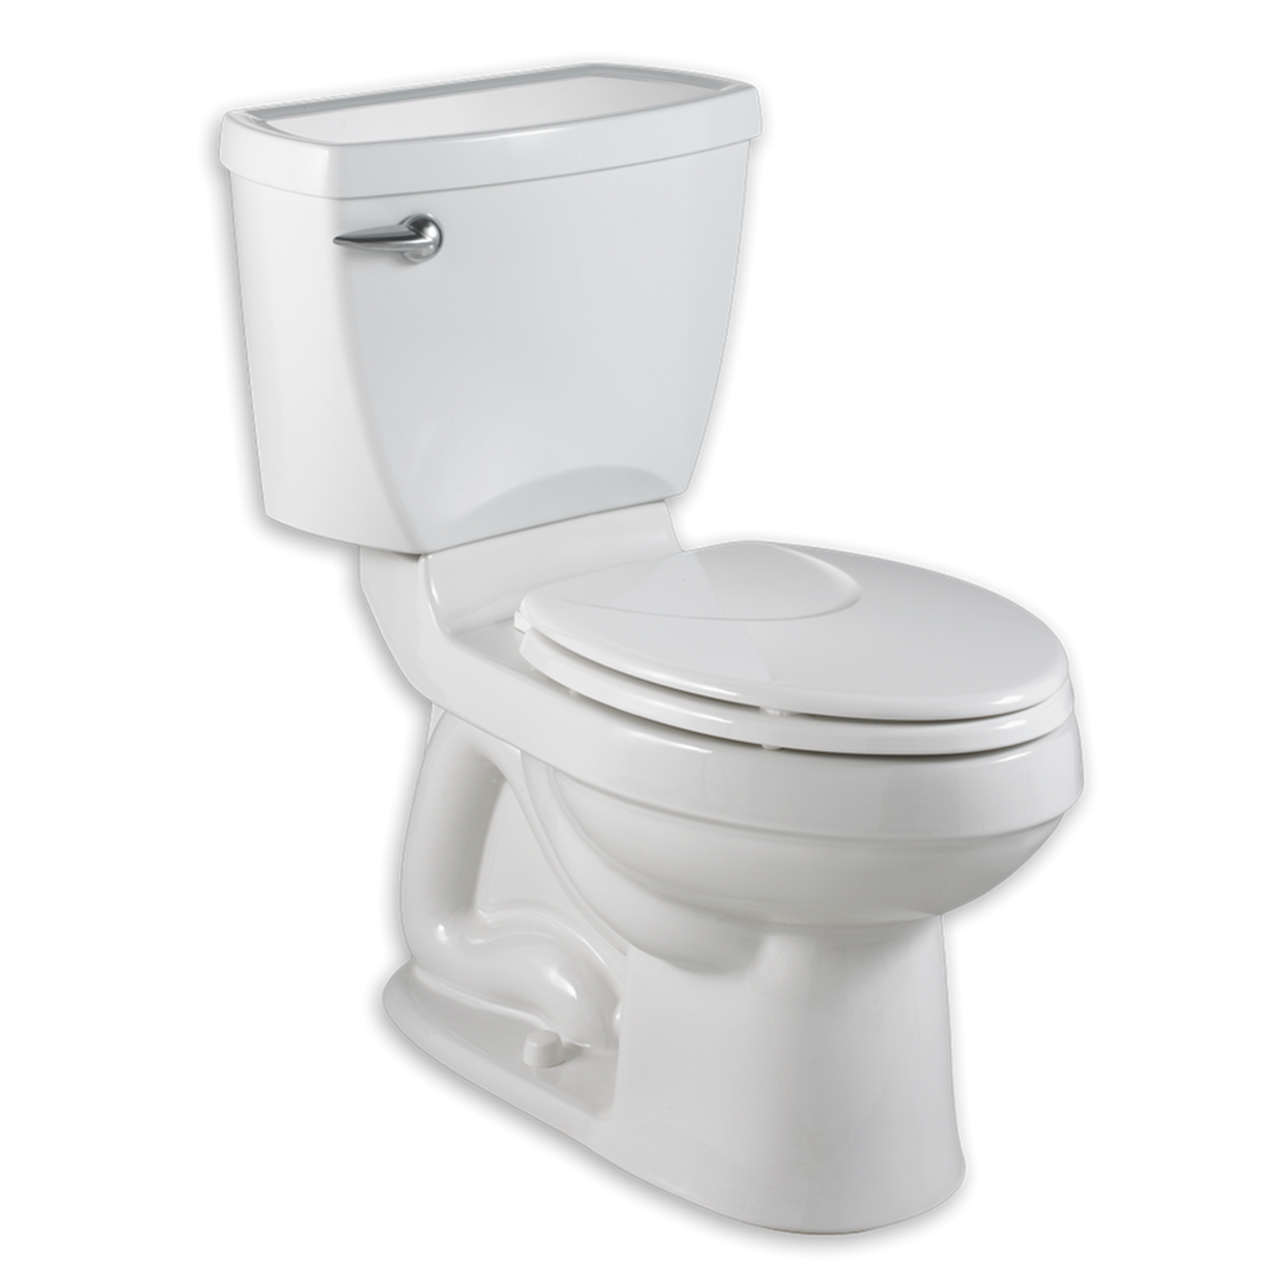 Commode Photos Free Transparent Image HD PNG Image